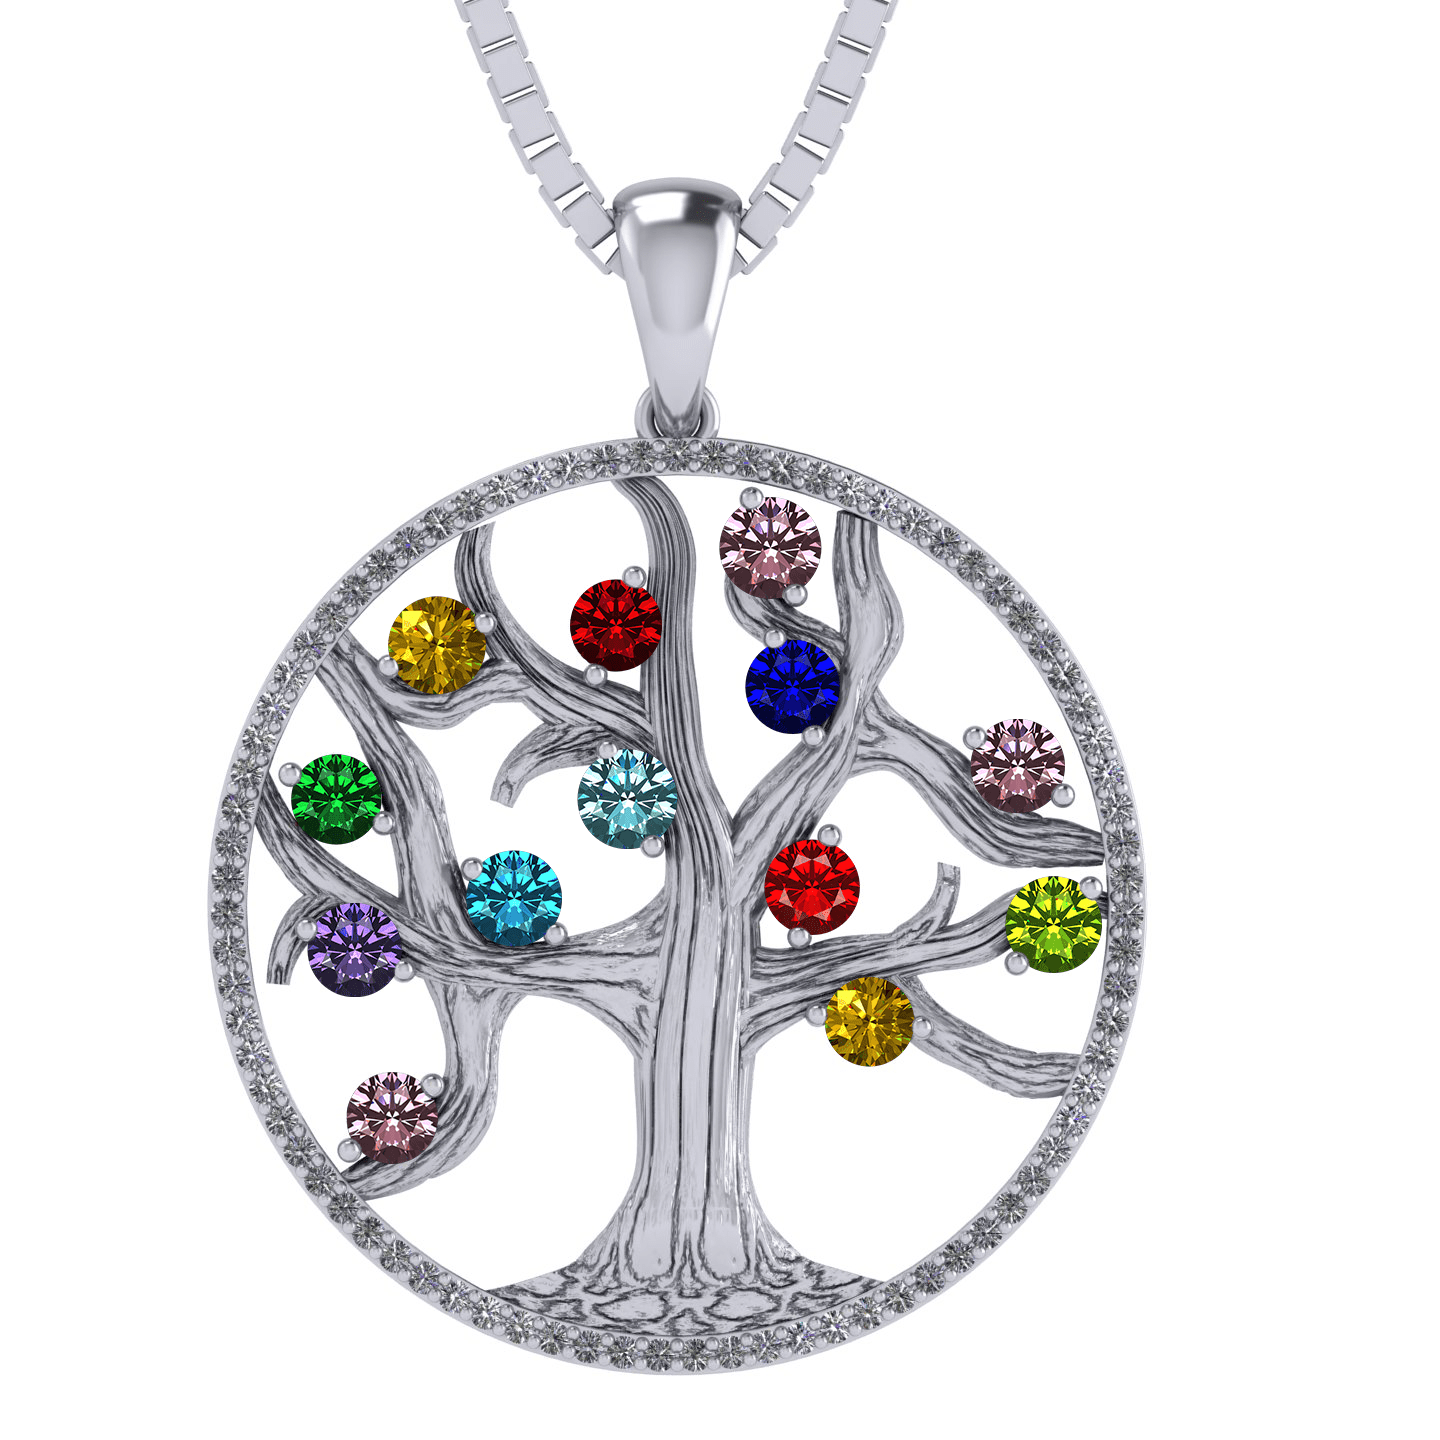 16 chain Sterling Silver Personalized 6mm Round Simulated Birthstone Family Tree Locket Mothers Day Gift